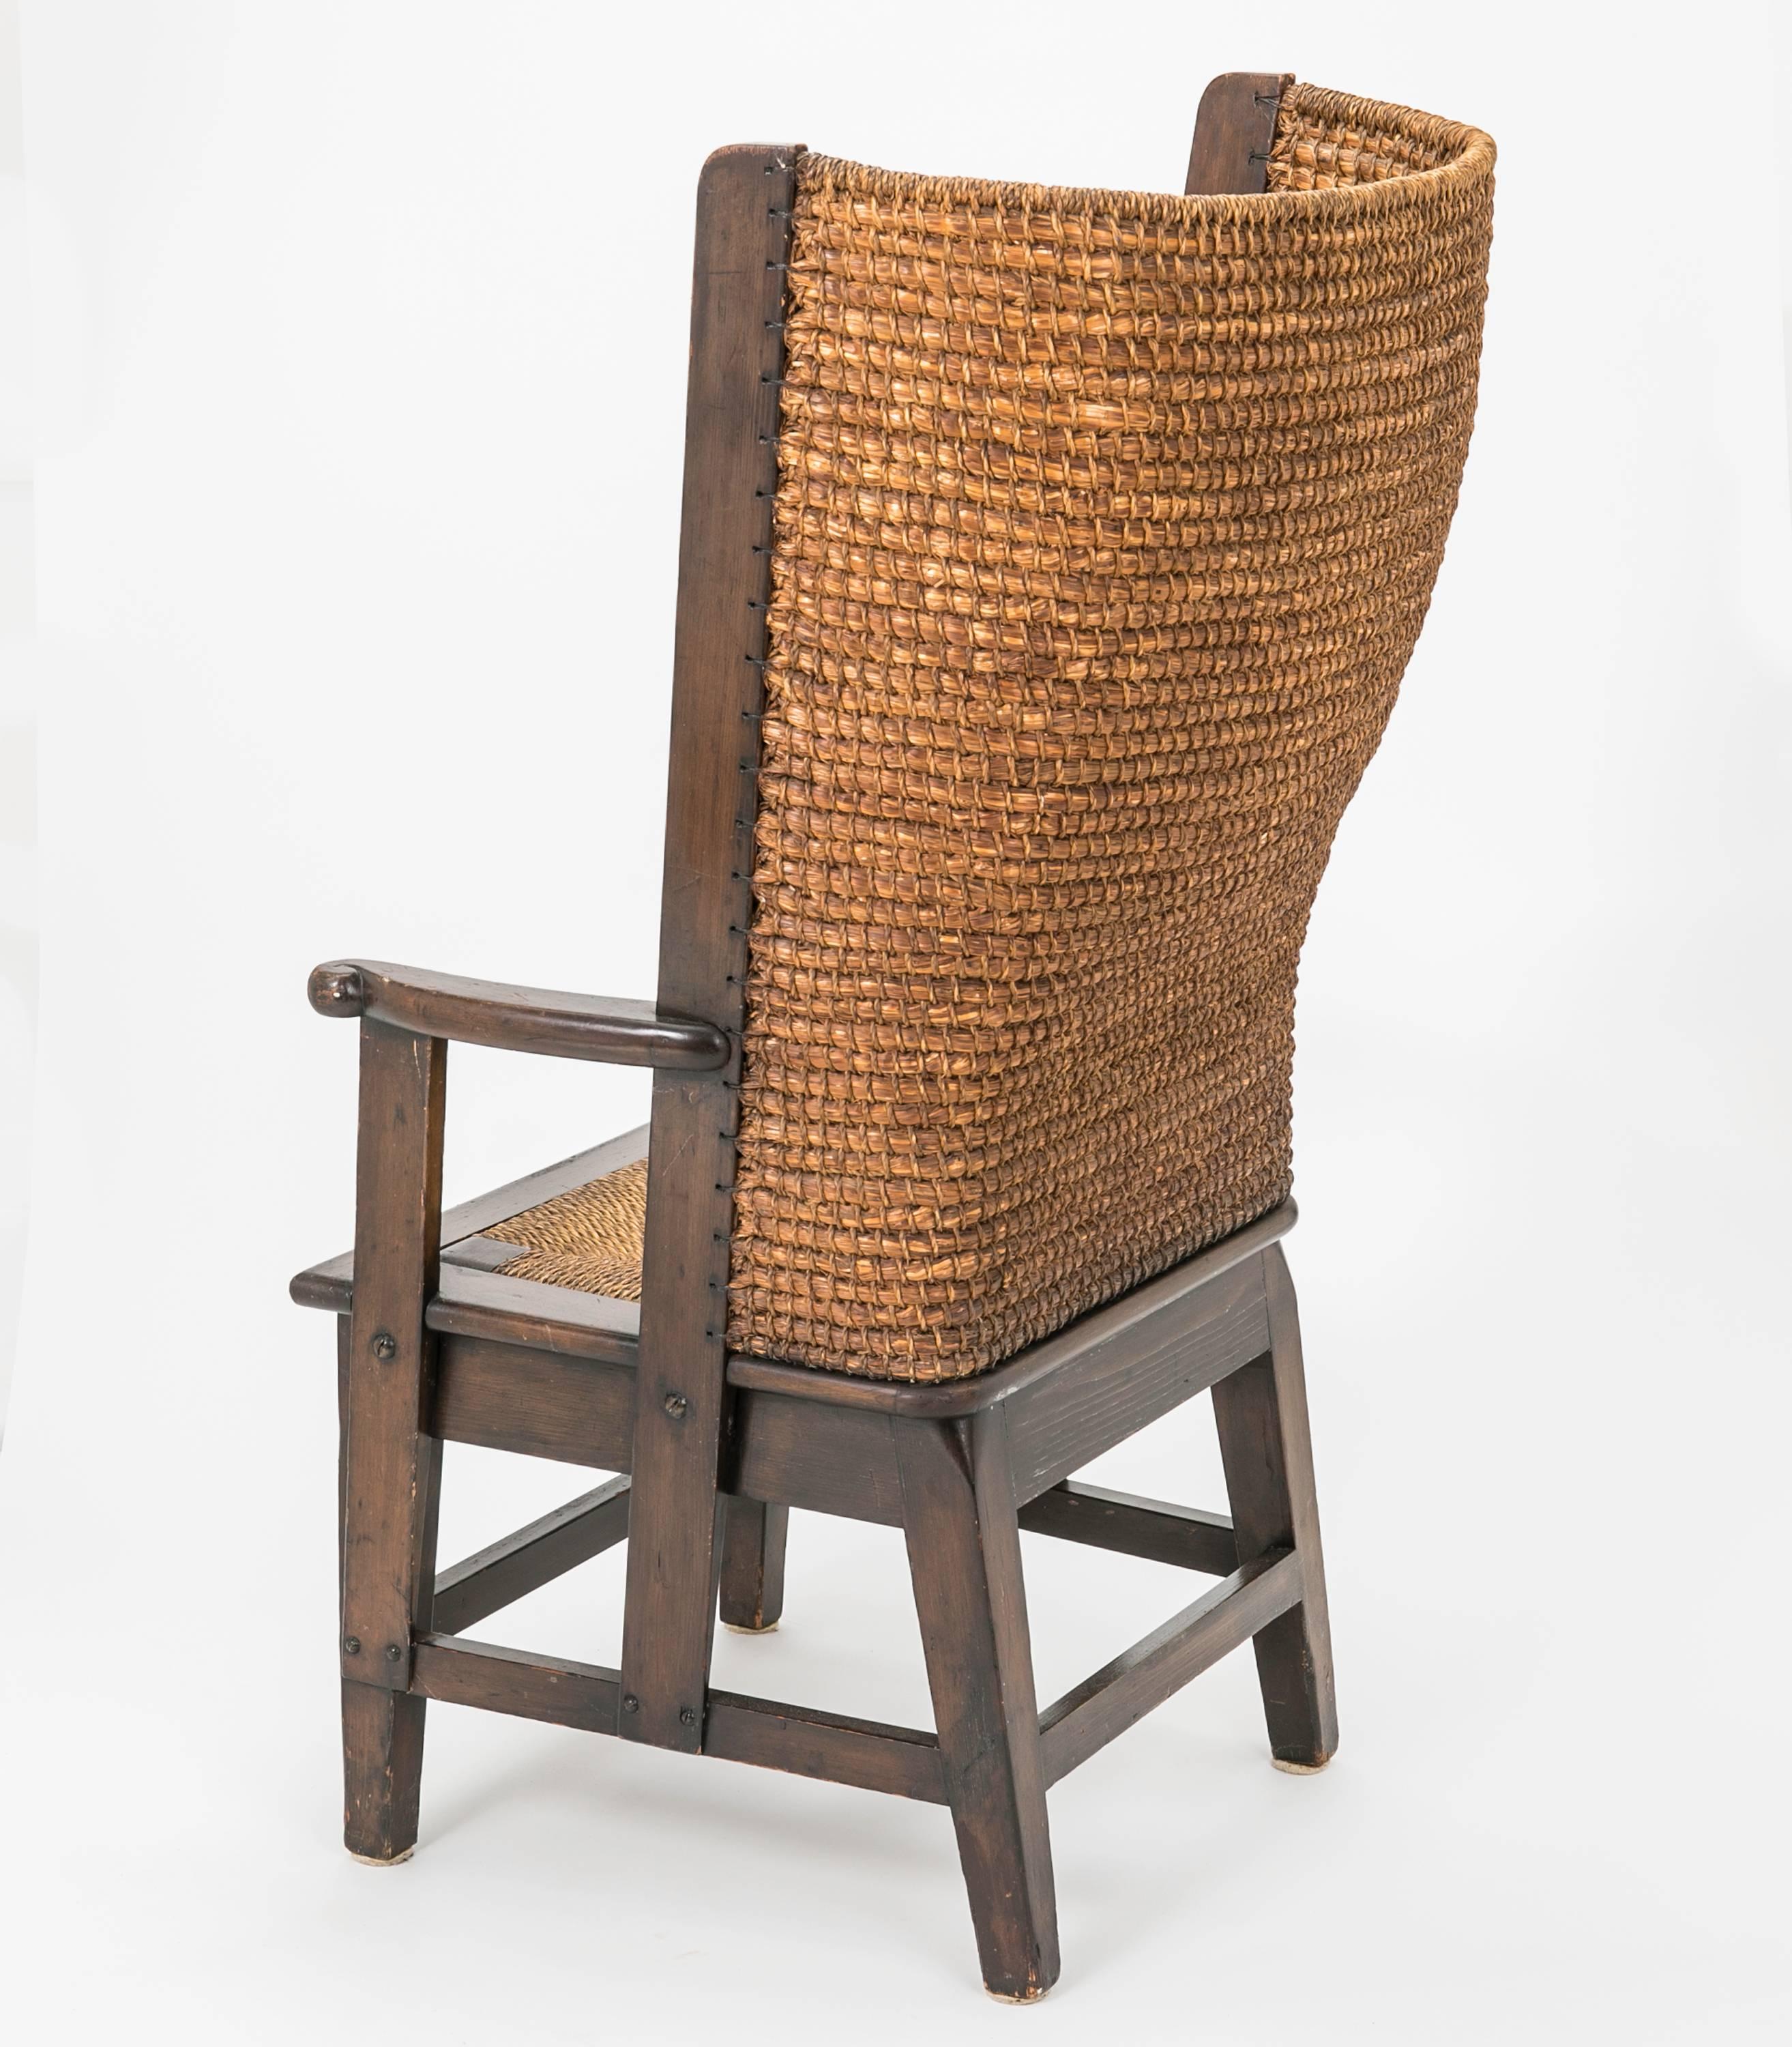 20th Century Antique Rush Chair, Scottish Orkney